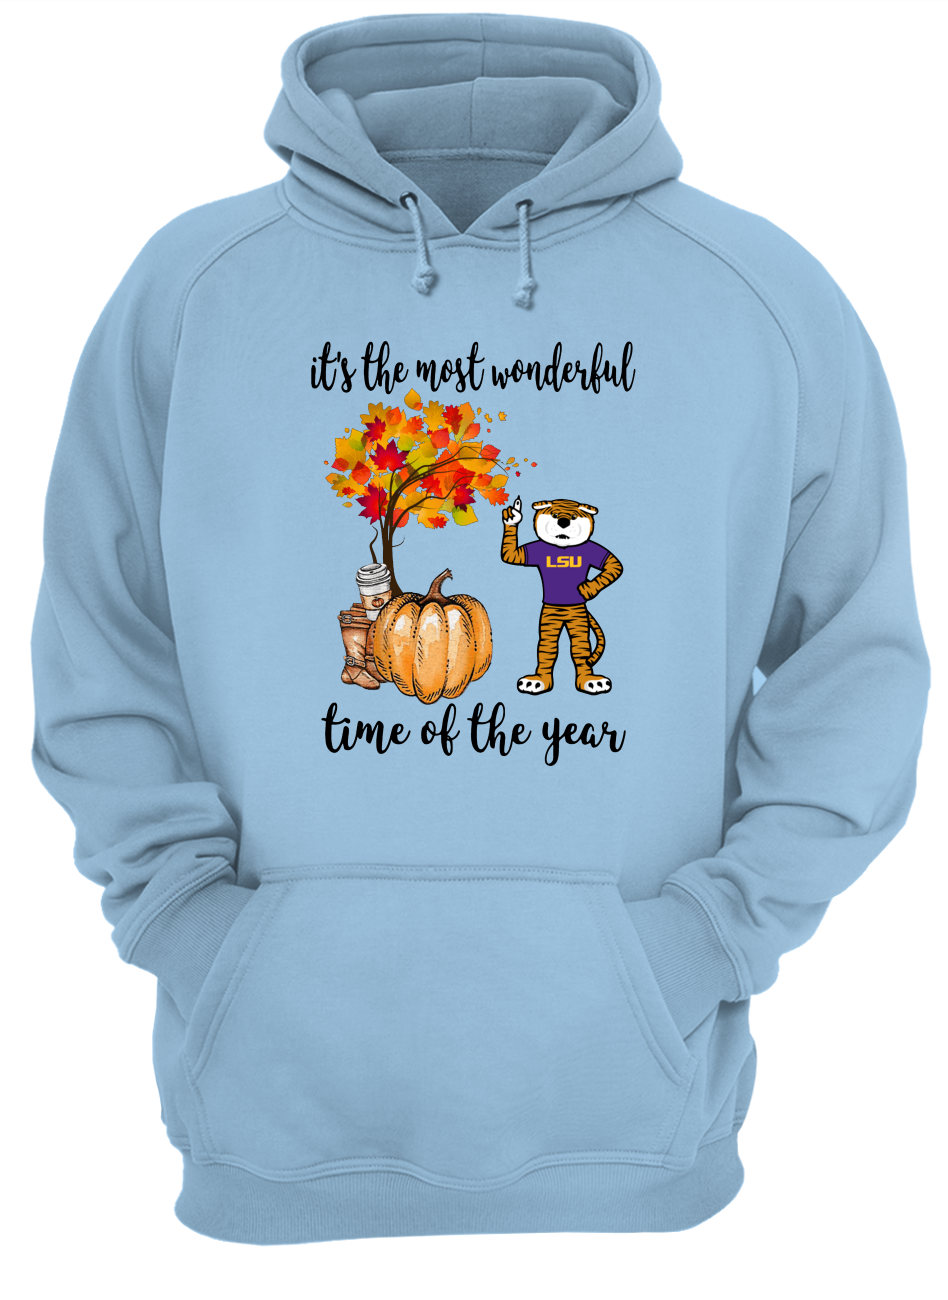 LSU tigers it's the most wonderful time of the year hoodie